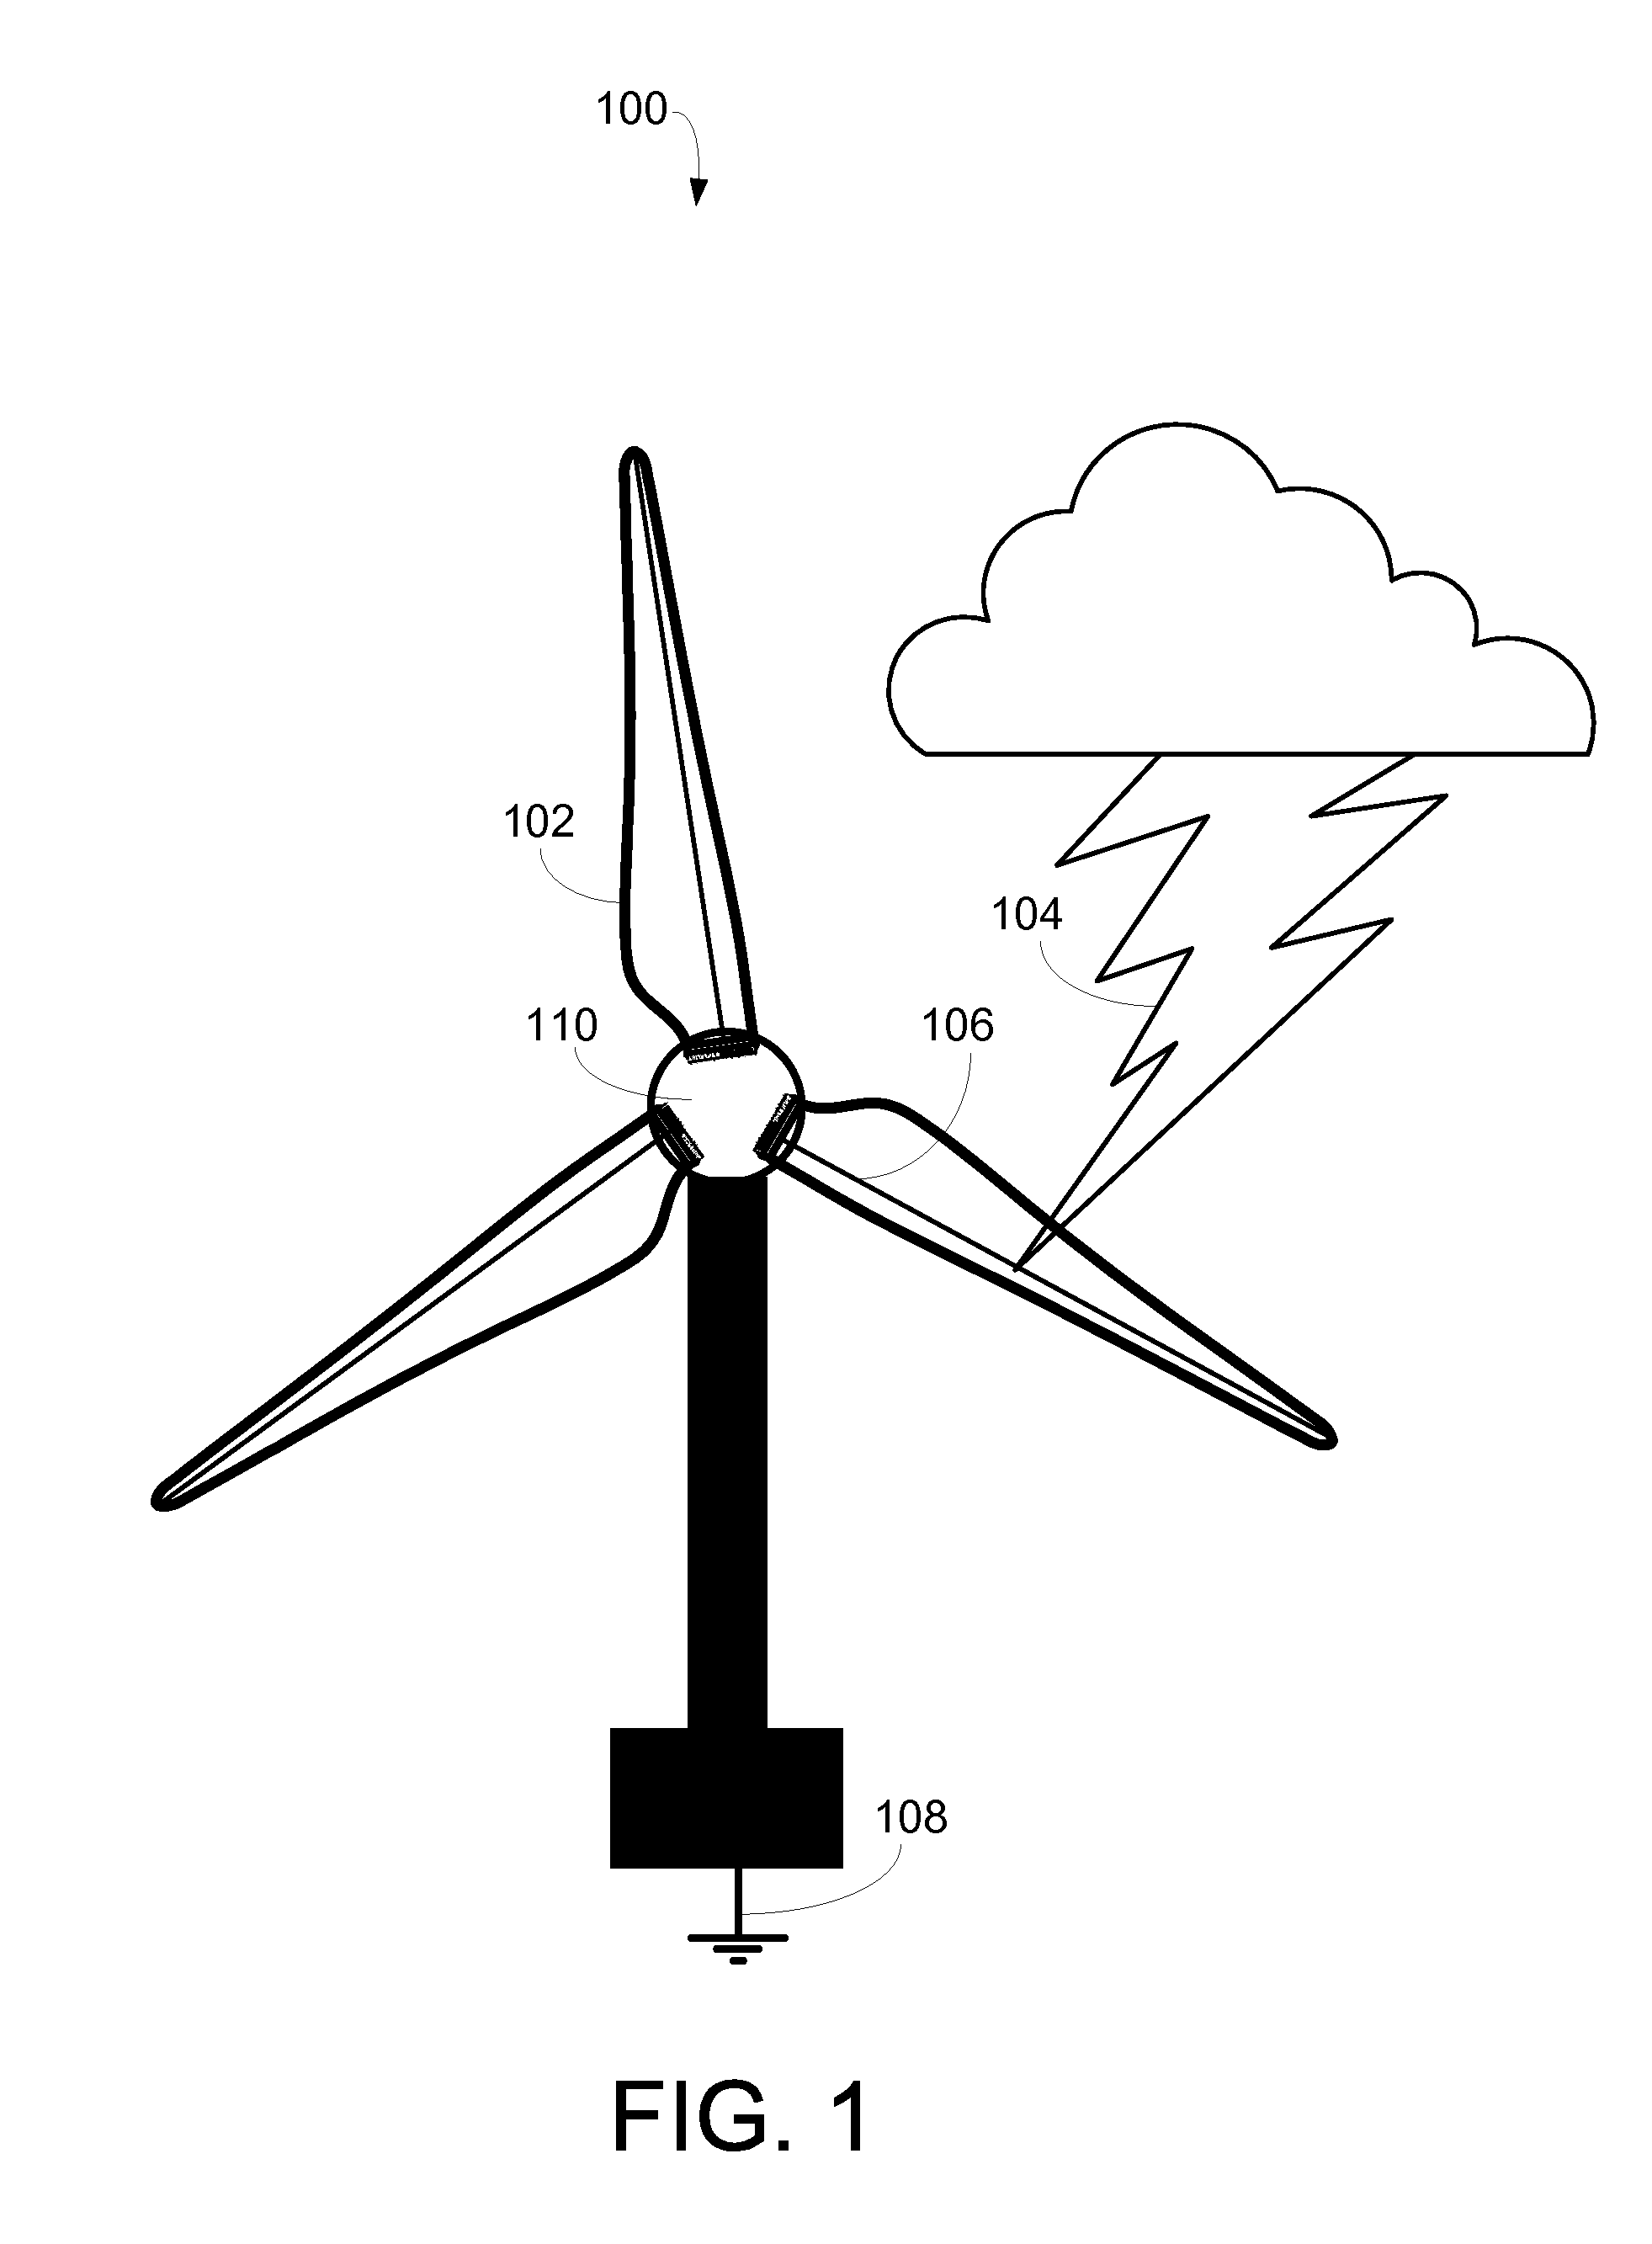 Systems, methods, and apparatus for detecting lightning strikes